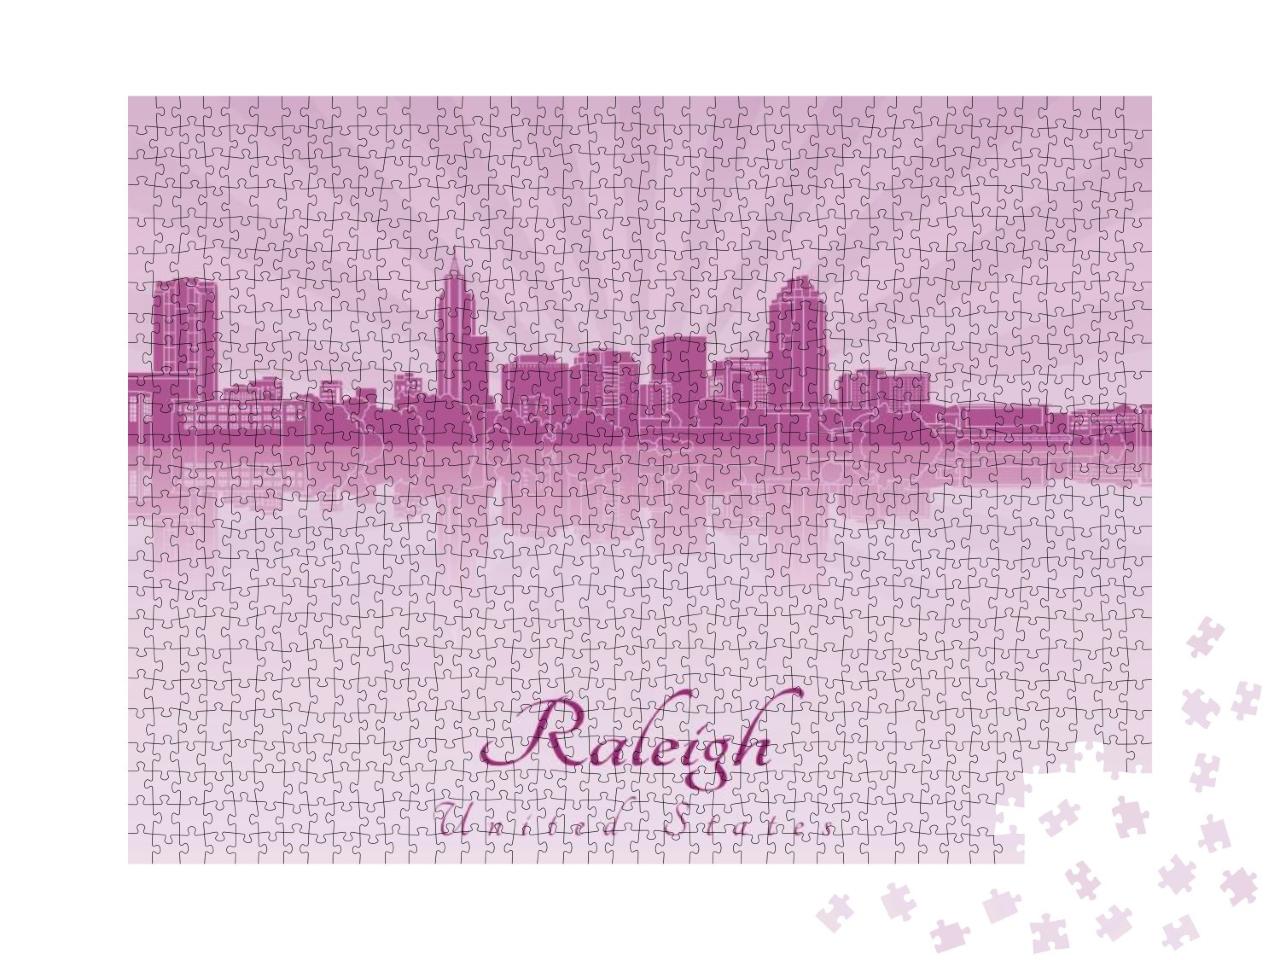 Raleigh Skyline in Purple Radiant Orchid in Editable Vect... Jigsaw Puzzle with 1000 pieces